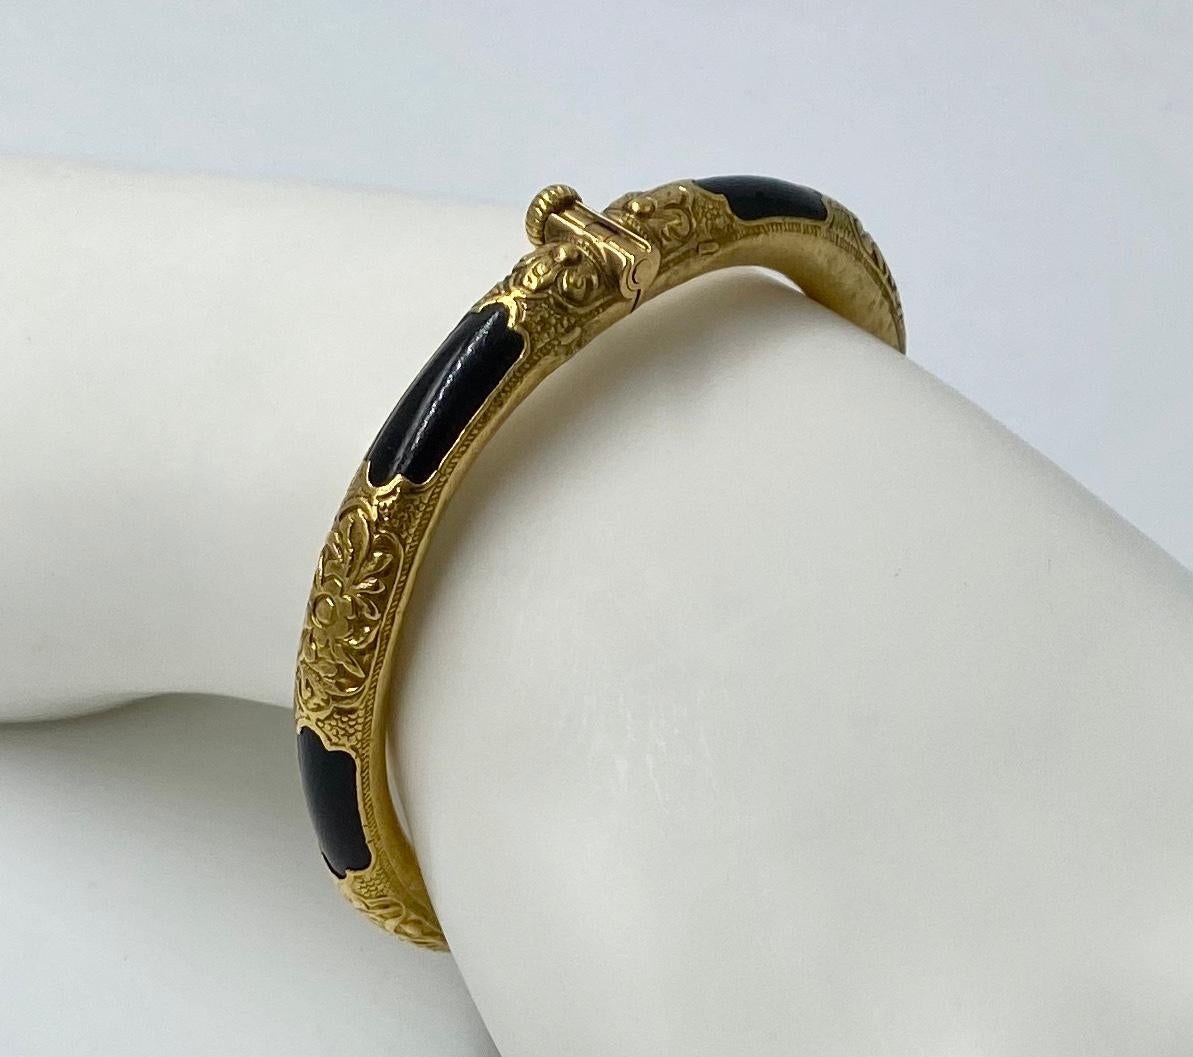 A magnificent antique circa 1930 Chinese Hinged Bangle Bracelet in beautifully engraved 22 Karat Yellow Gold with Black Coral adornments.  The bracelet has six 22 karat gold sections with engraved flower and leaf designs.  The beautiful gold